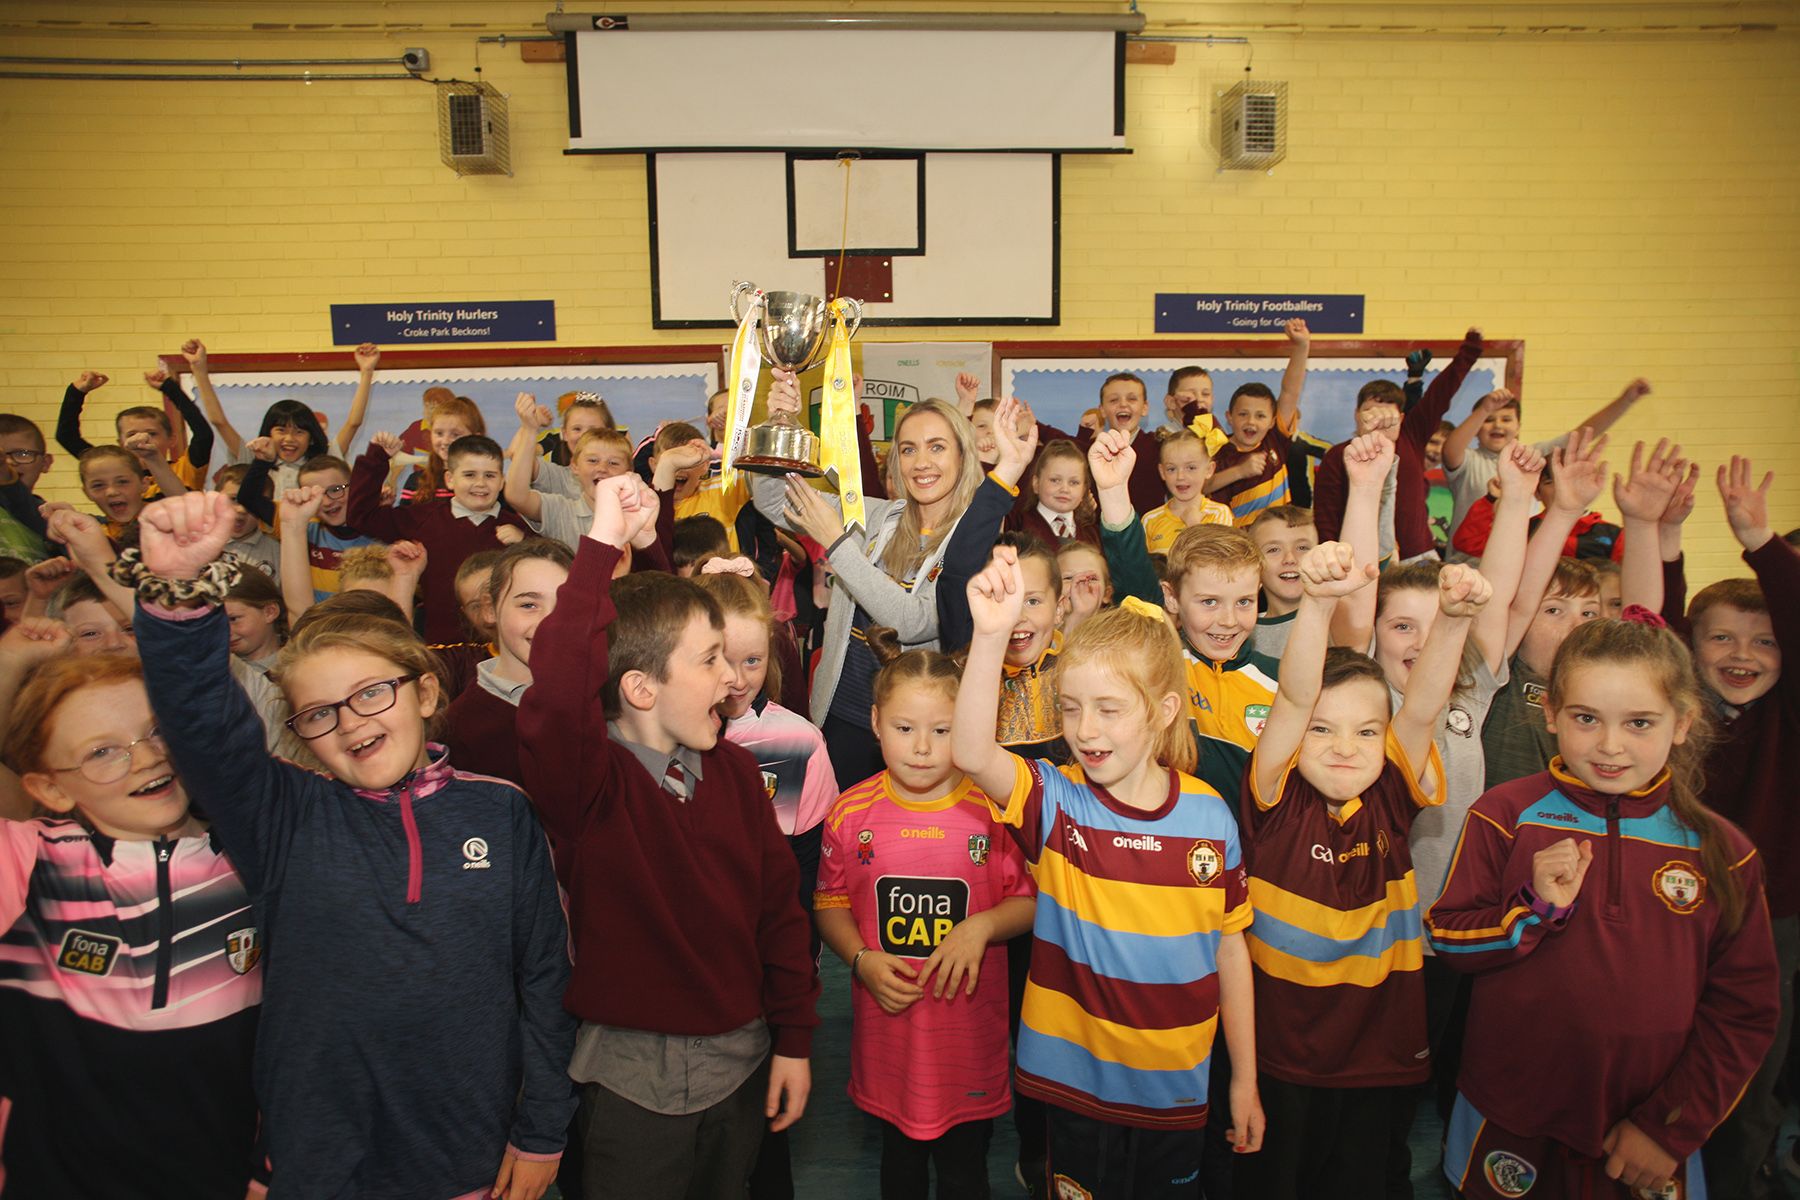 VISIT: Niamh Ann Donnelly visits the Turf Lodge school to speak to pupils and staff